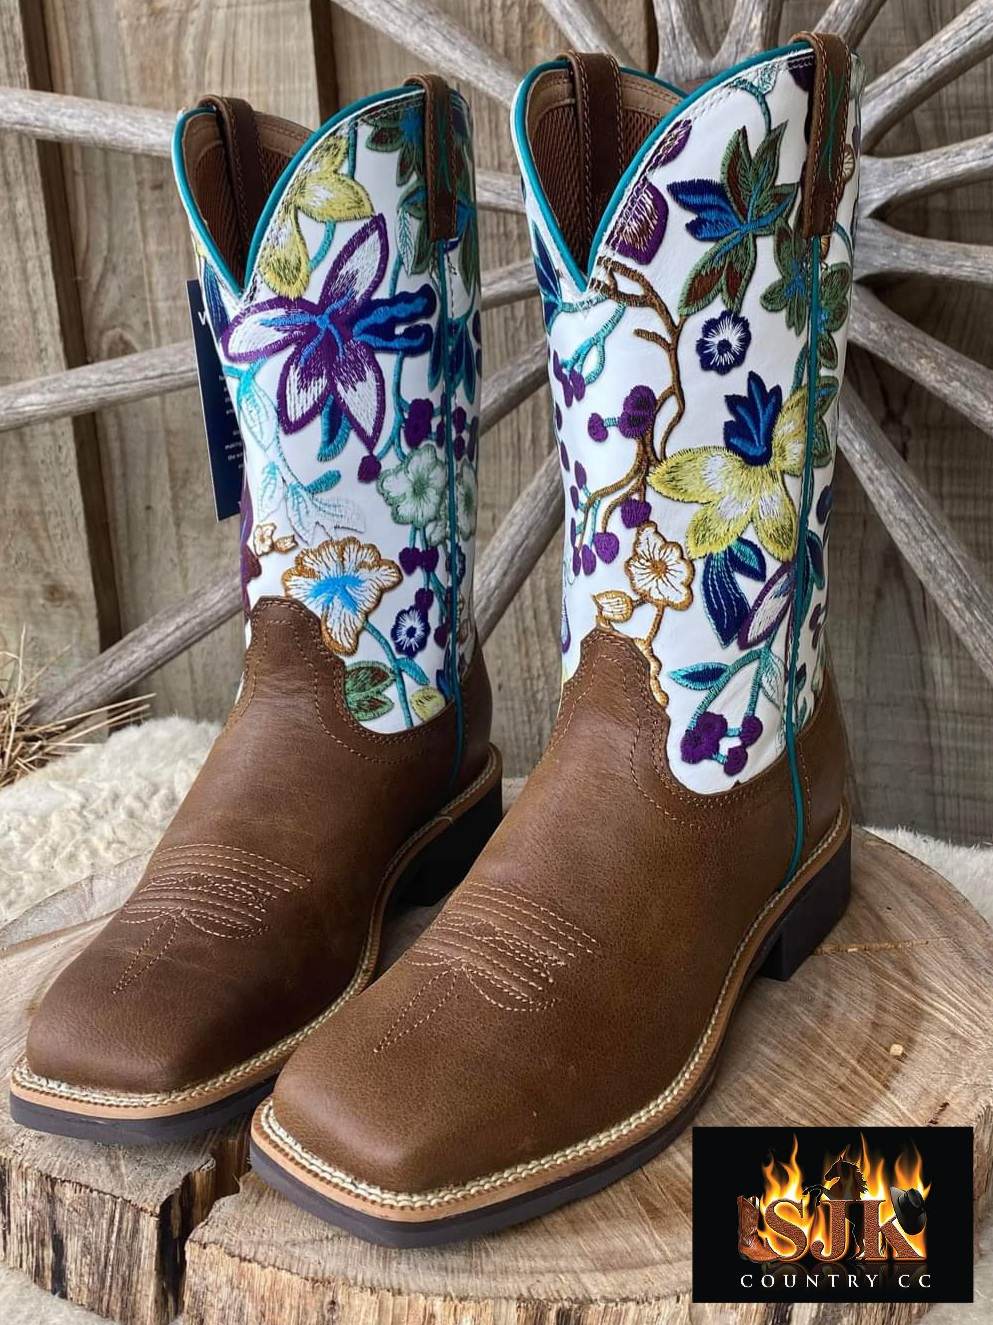 Twisted X Top Leather Hand Western Cowboy Boots Size 7/7.5